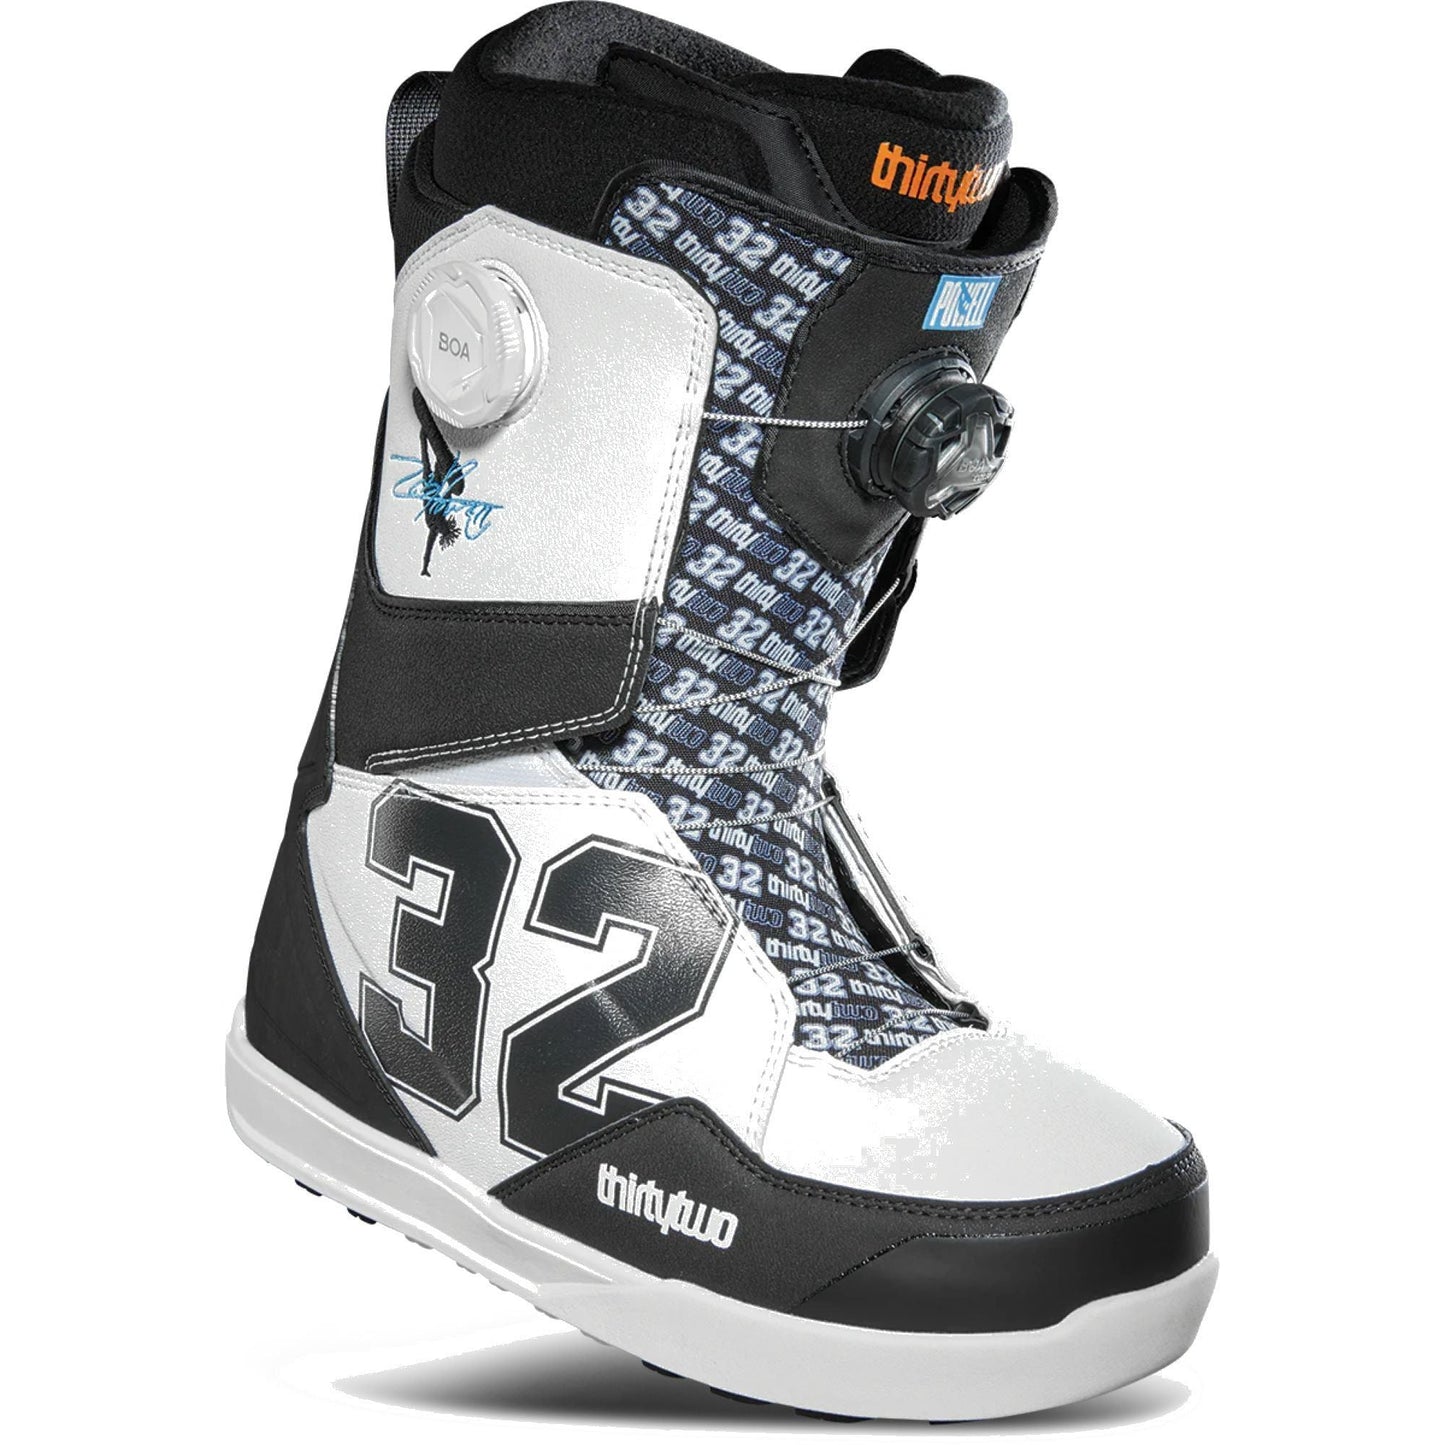 ThirtyTwo Lashed Powell Double BOA Snowboard Boots - Openbox White Black - ThirtyTwo Snowboard Boots